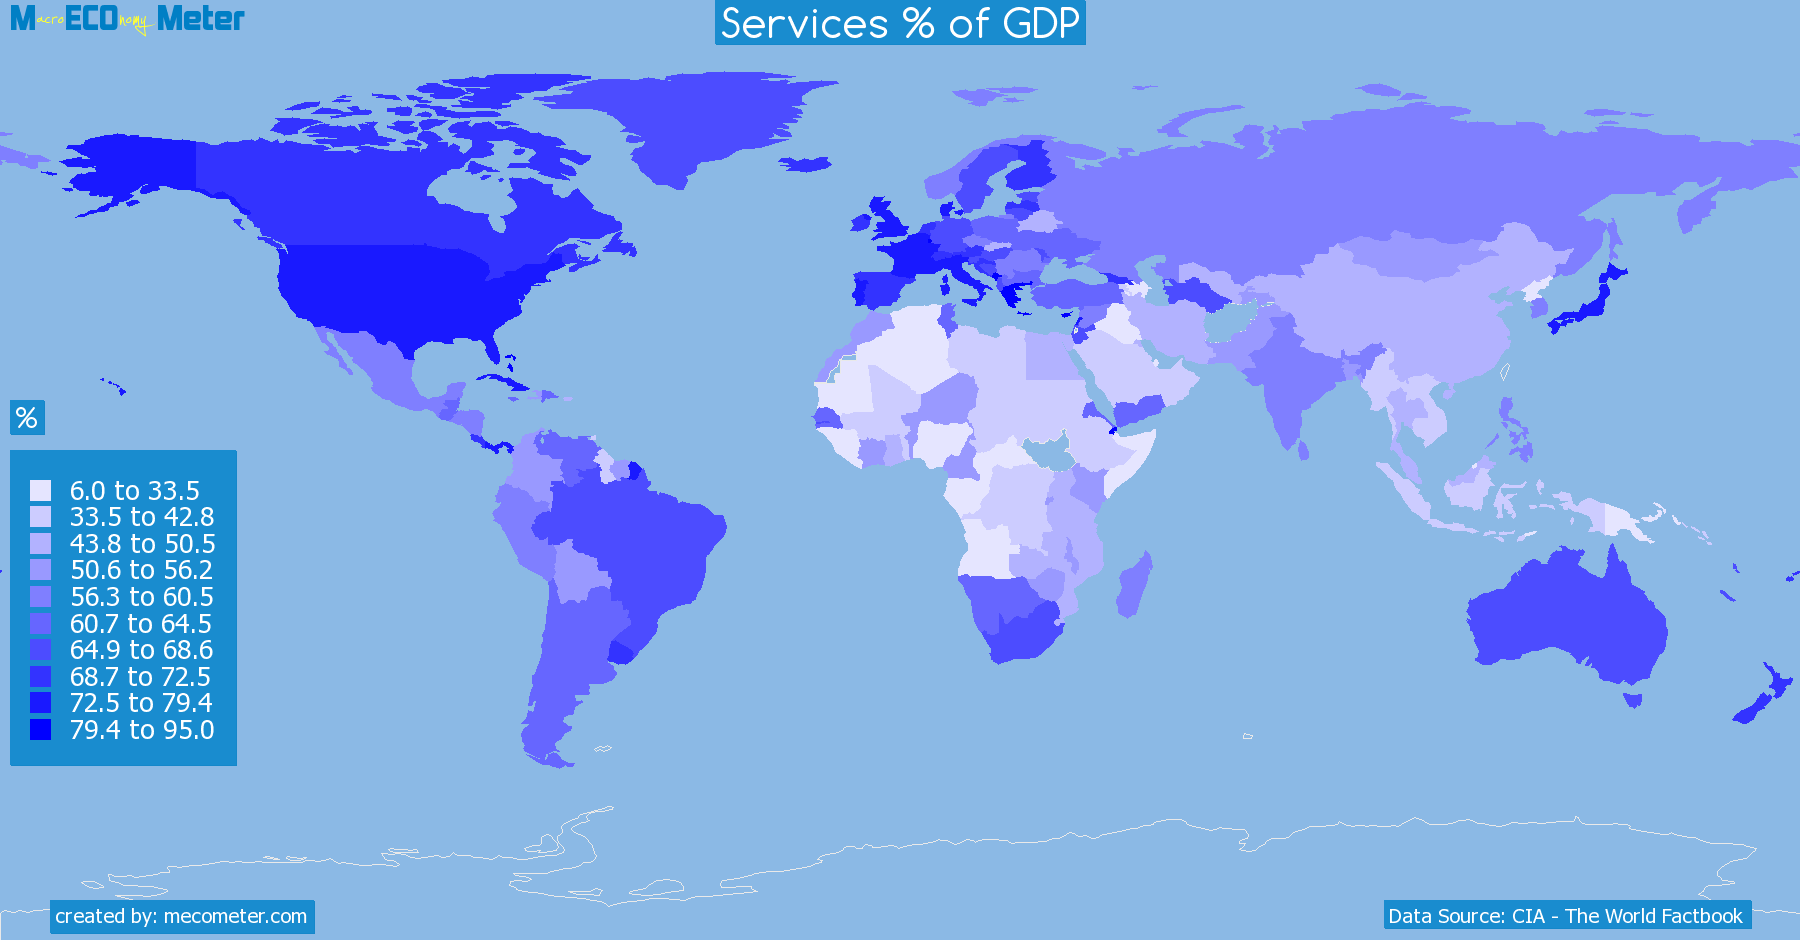 Services % of GDP